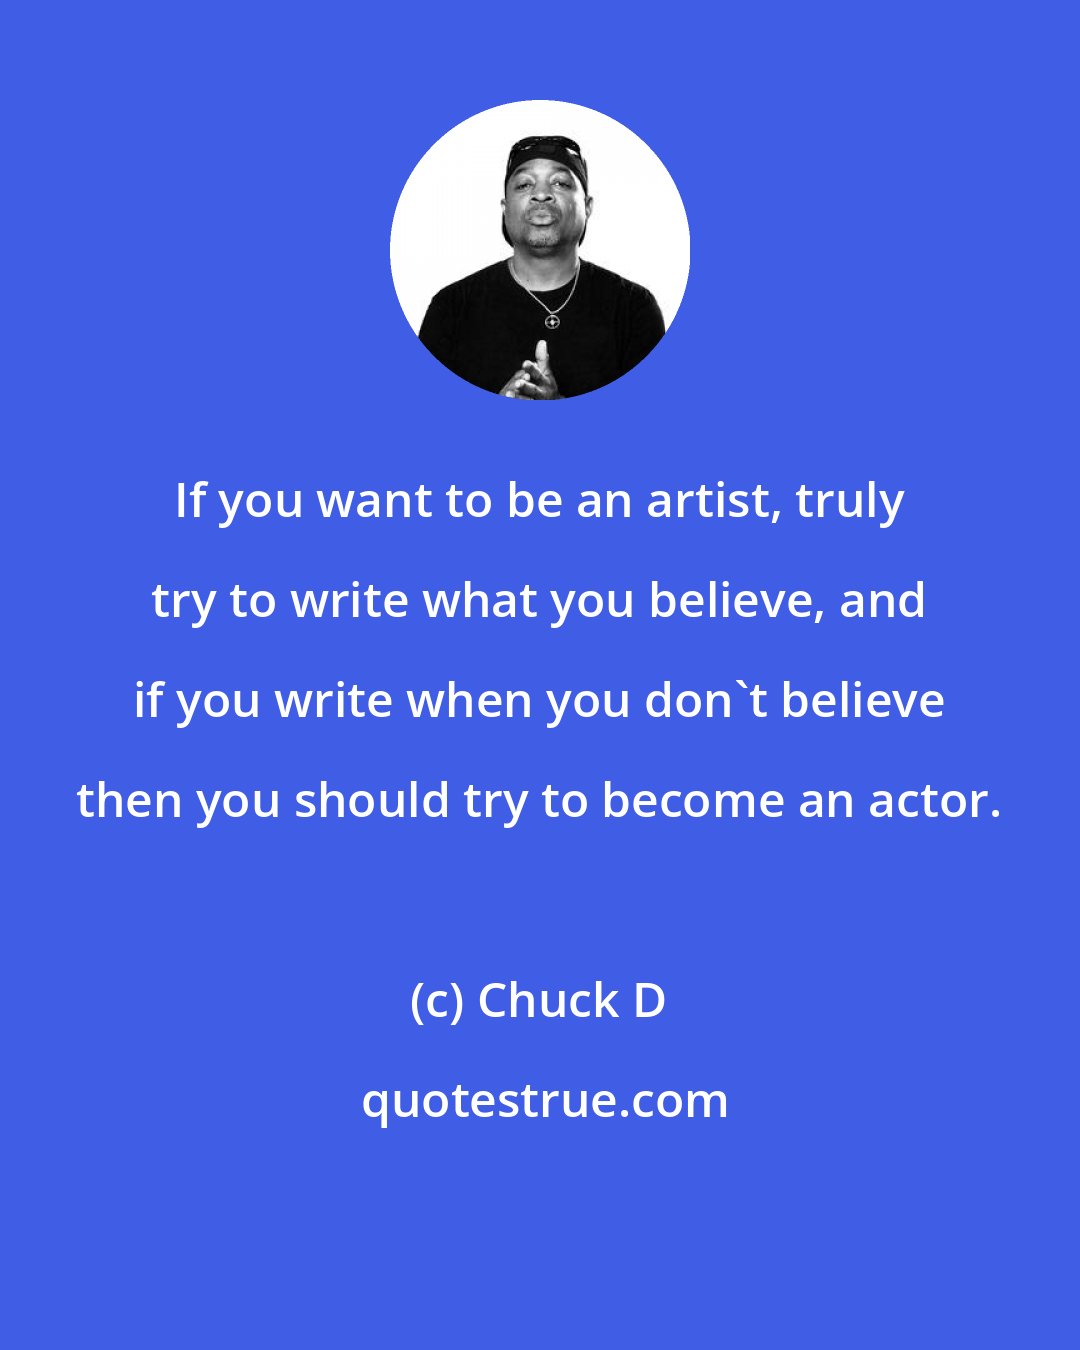 Chuck D: If you want to be an artist, truly try to write what you believe, and if you write when you don't believe then you should try to become an actor.